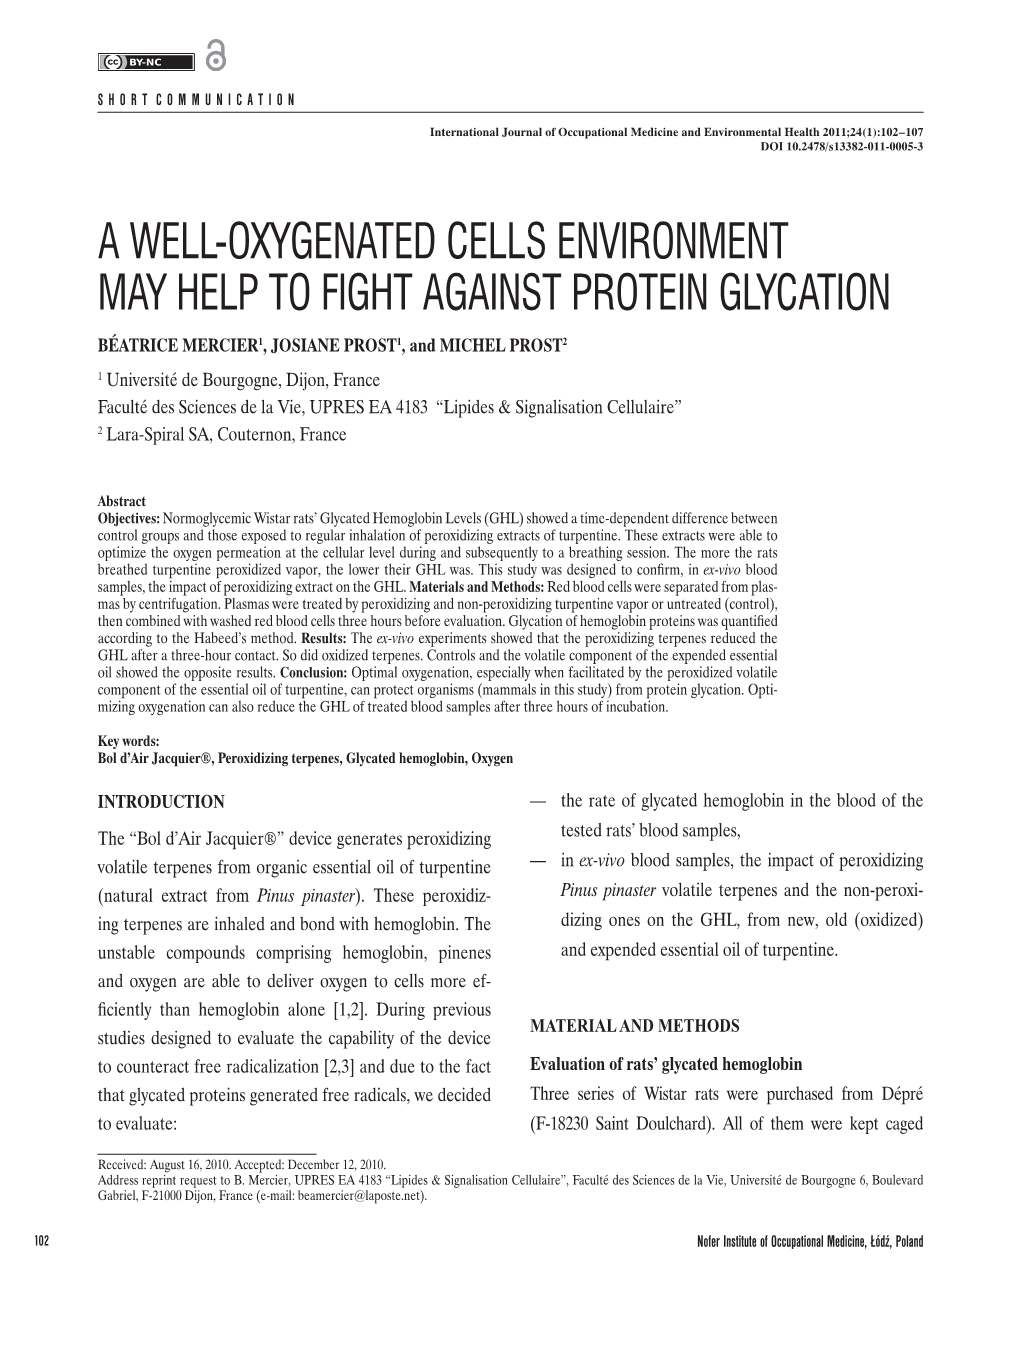 A Well-Oxygenated Cells Environment May Help To